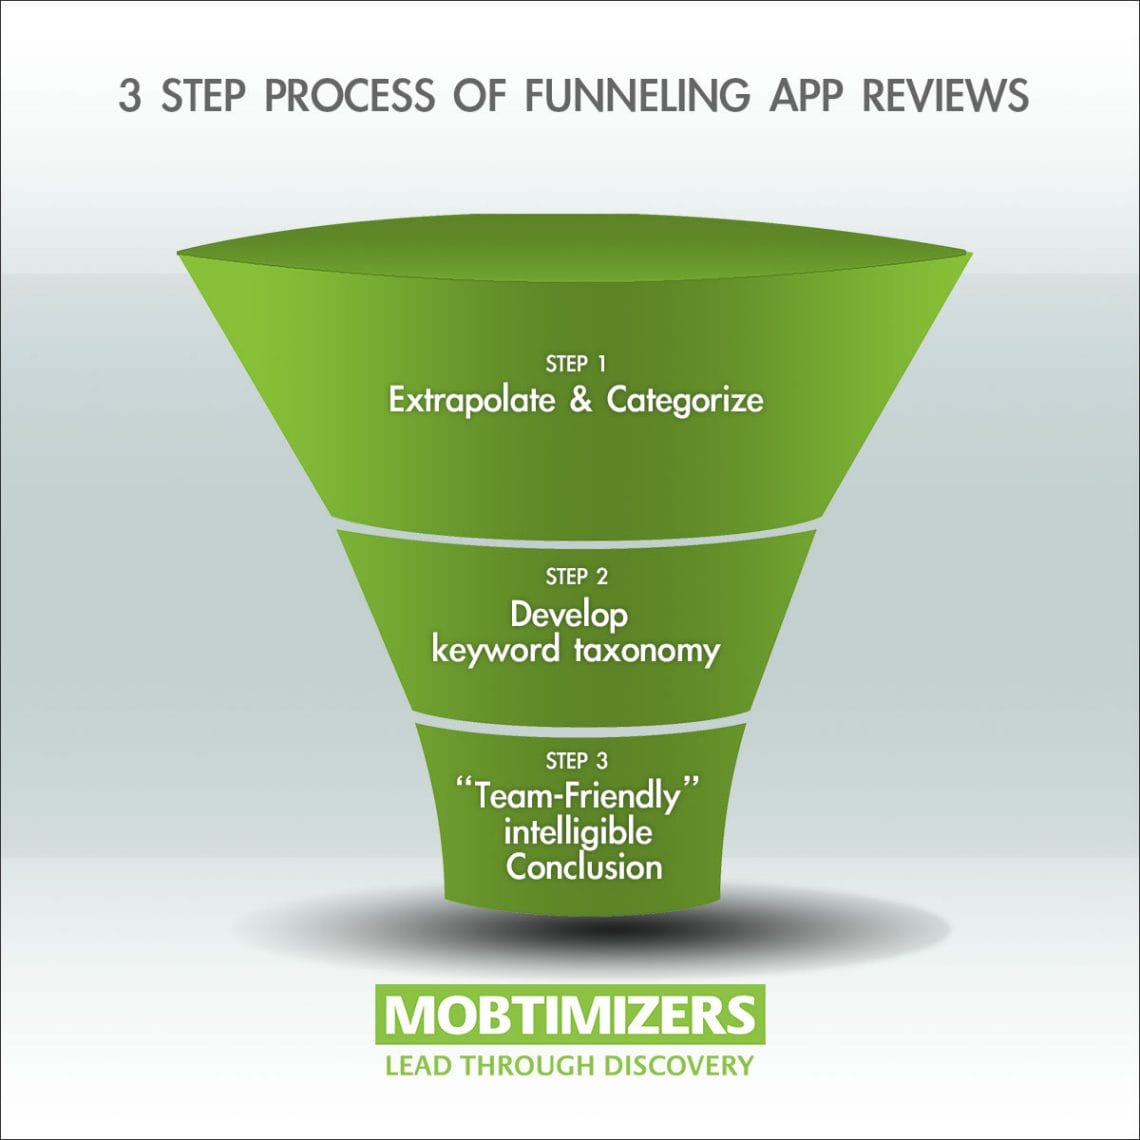 The 3 step process of funneling app reviews.